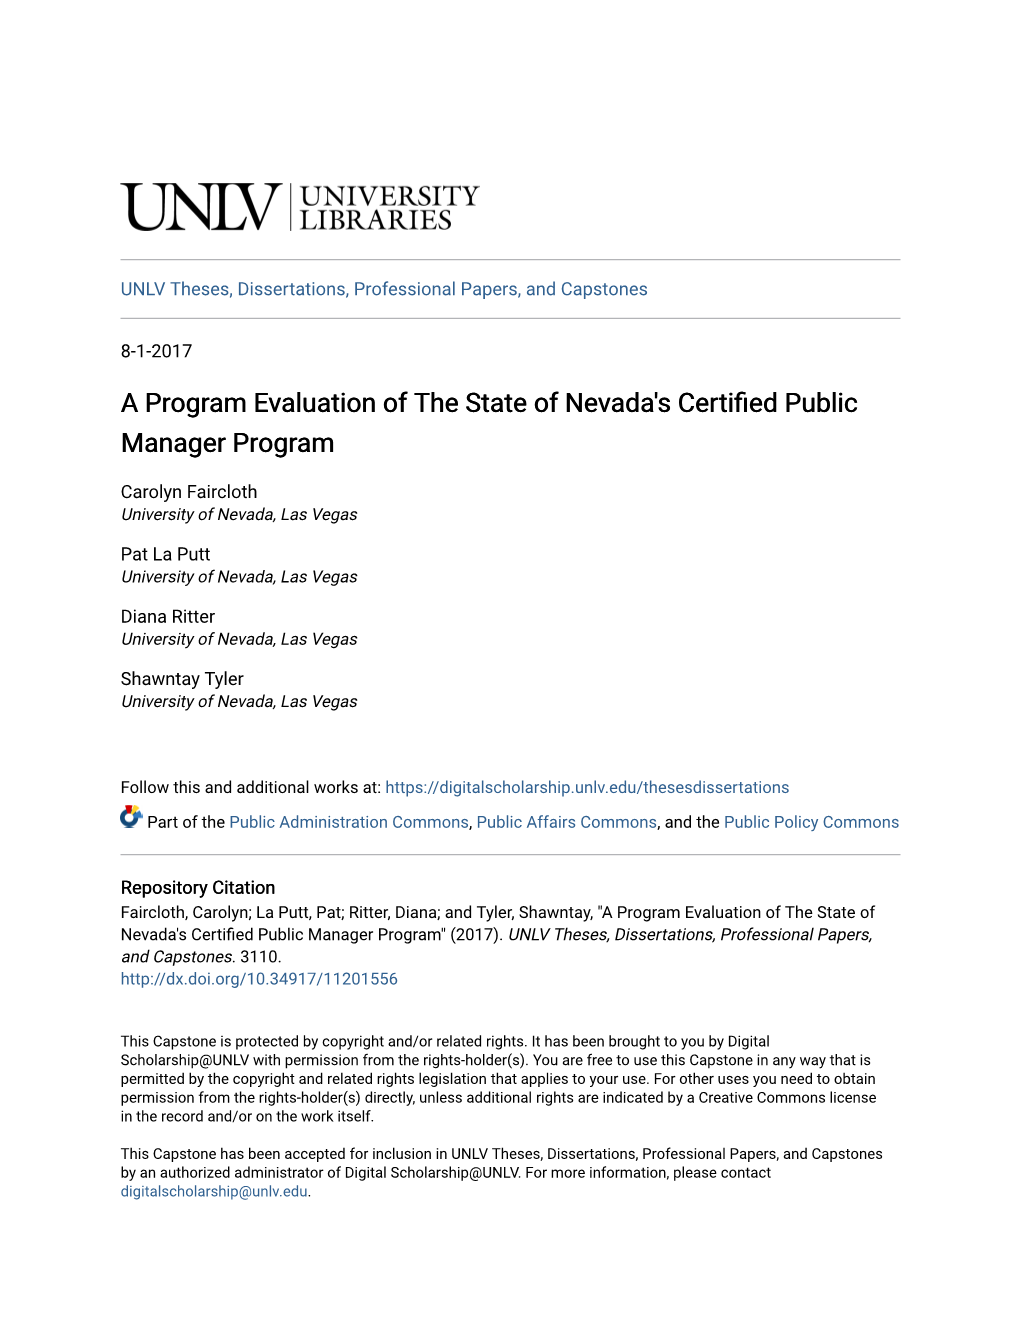 A Program Evaluation of the State of Nevada's Certified Public Manager Program